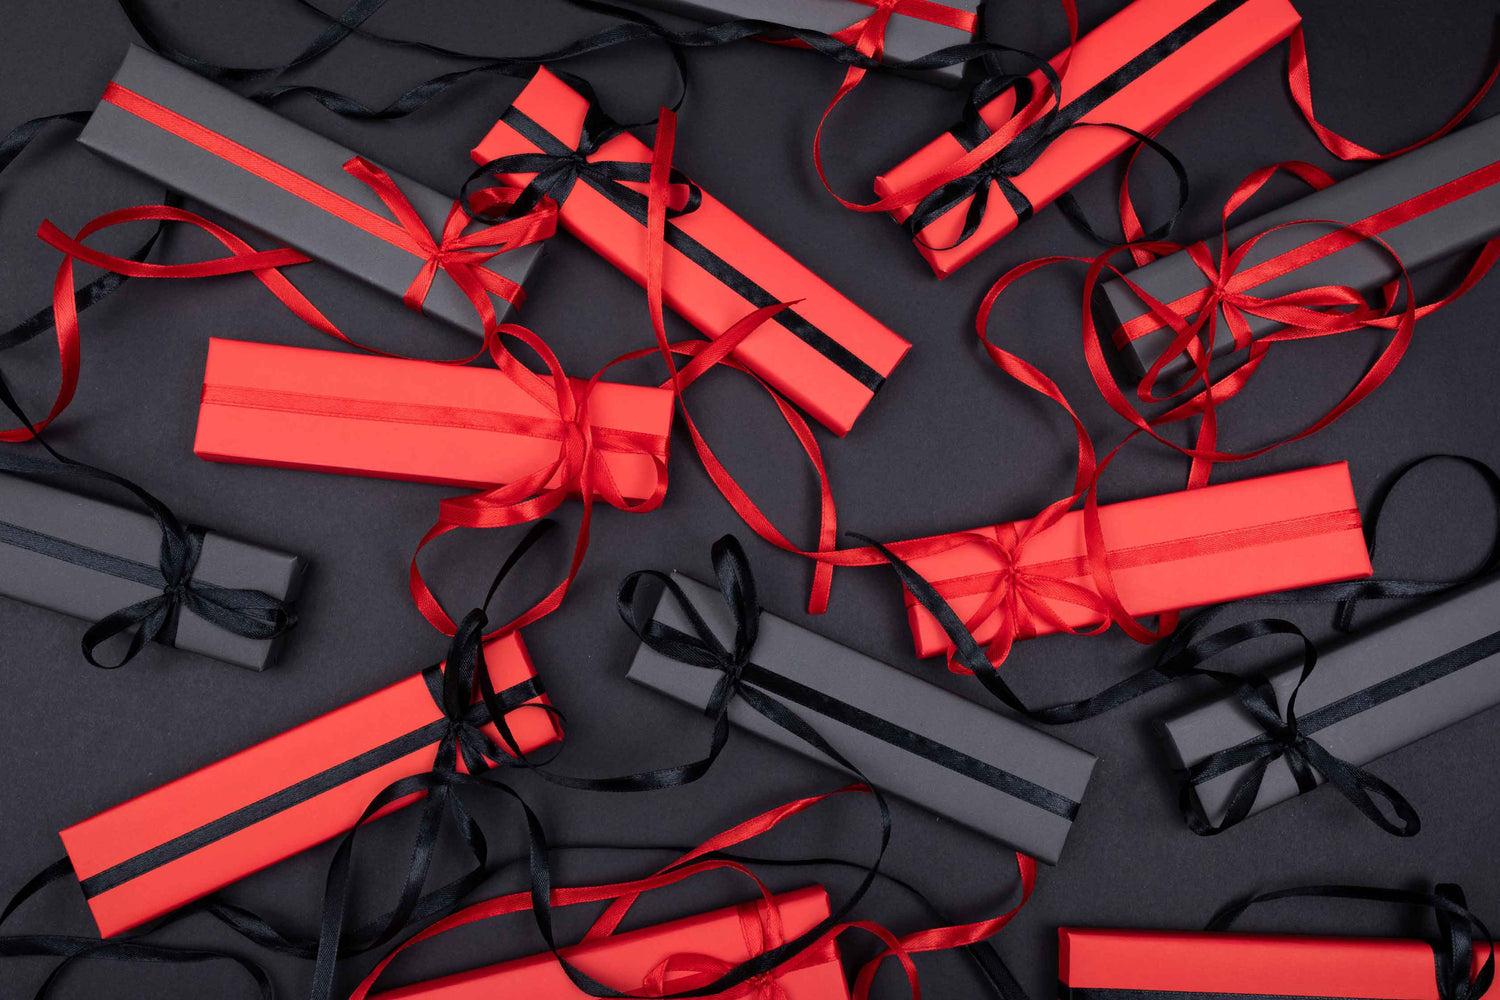 CuteBoxInc Background Image of Black and Red gifts with satin bows on black background. Photo by Tamanna Rumee 